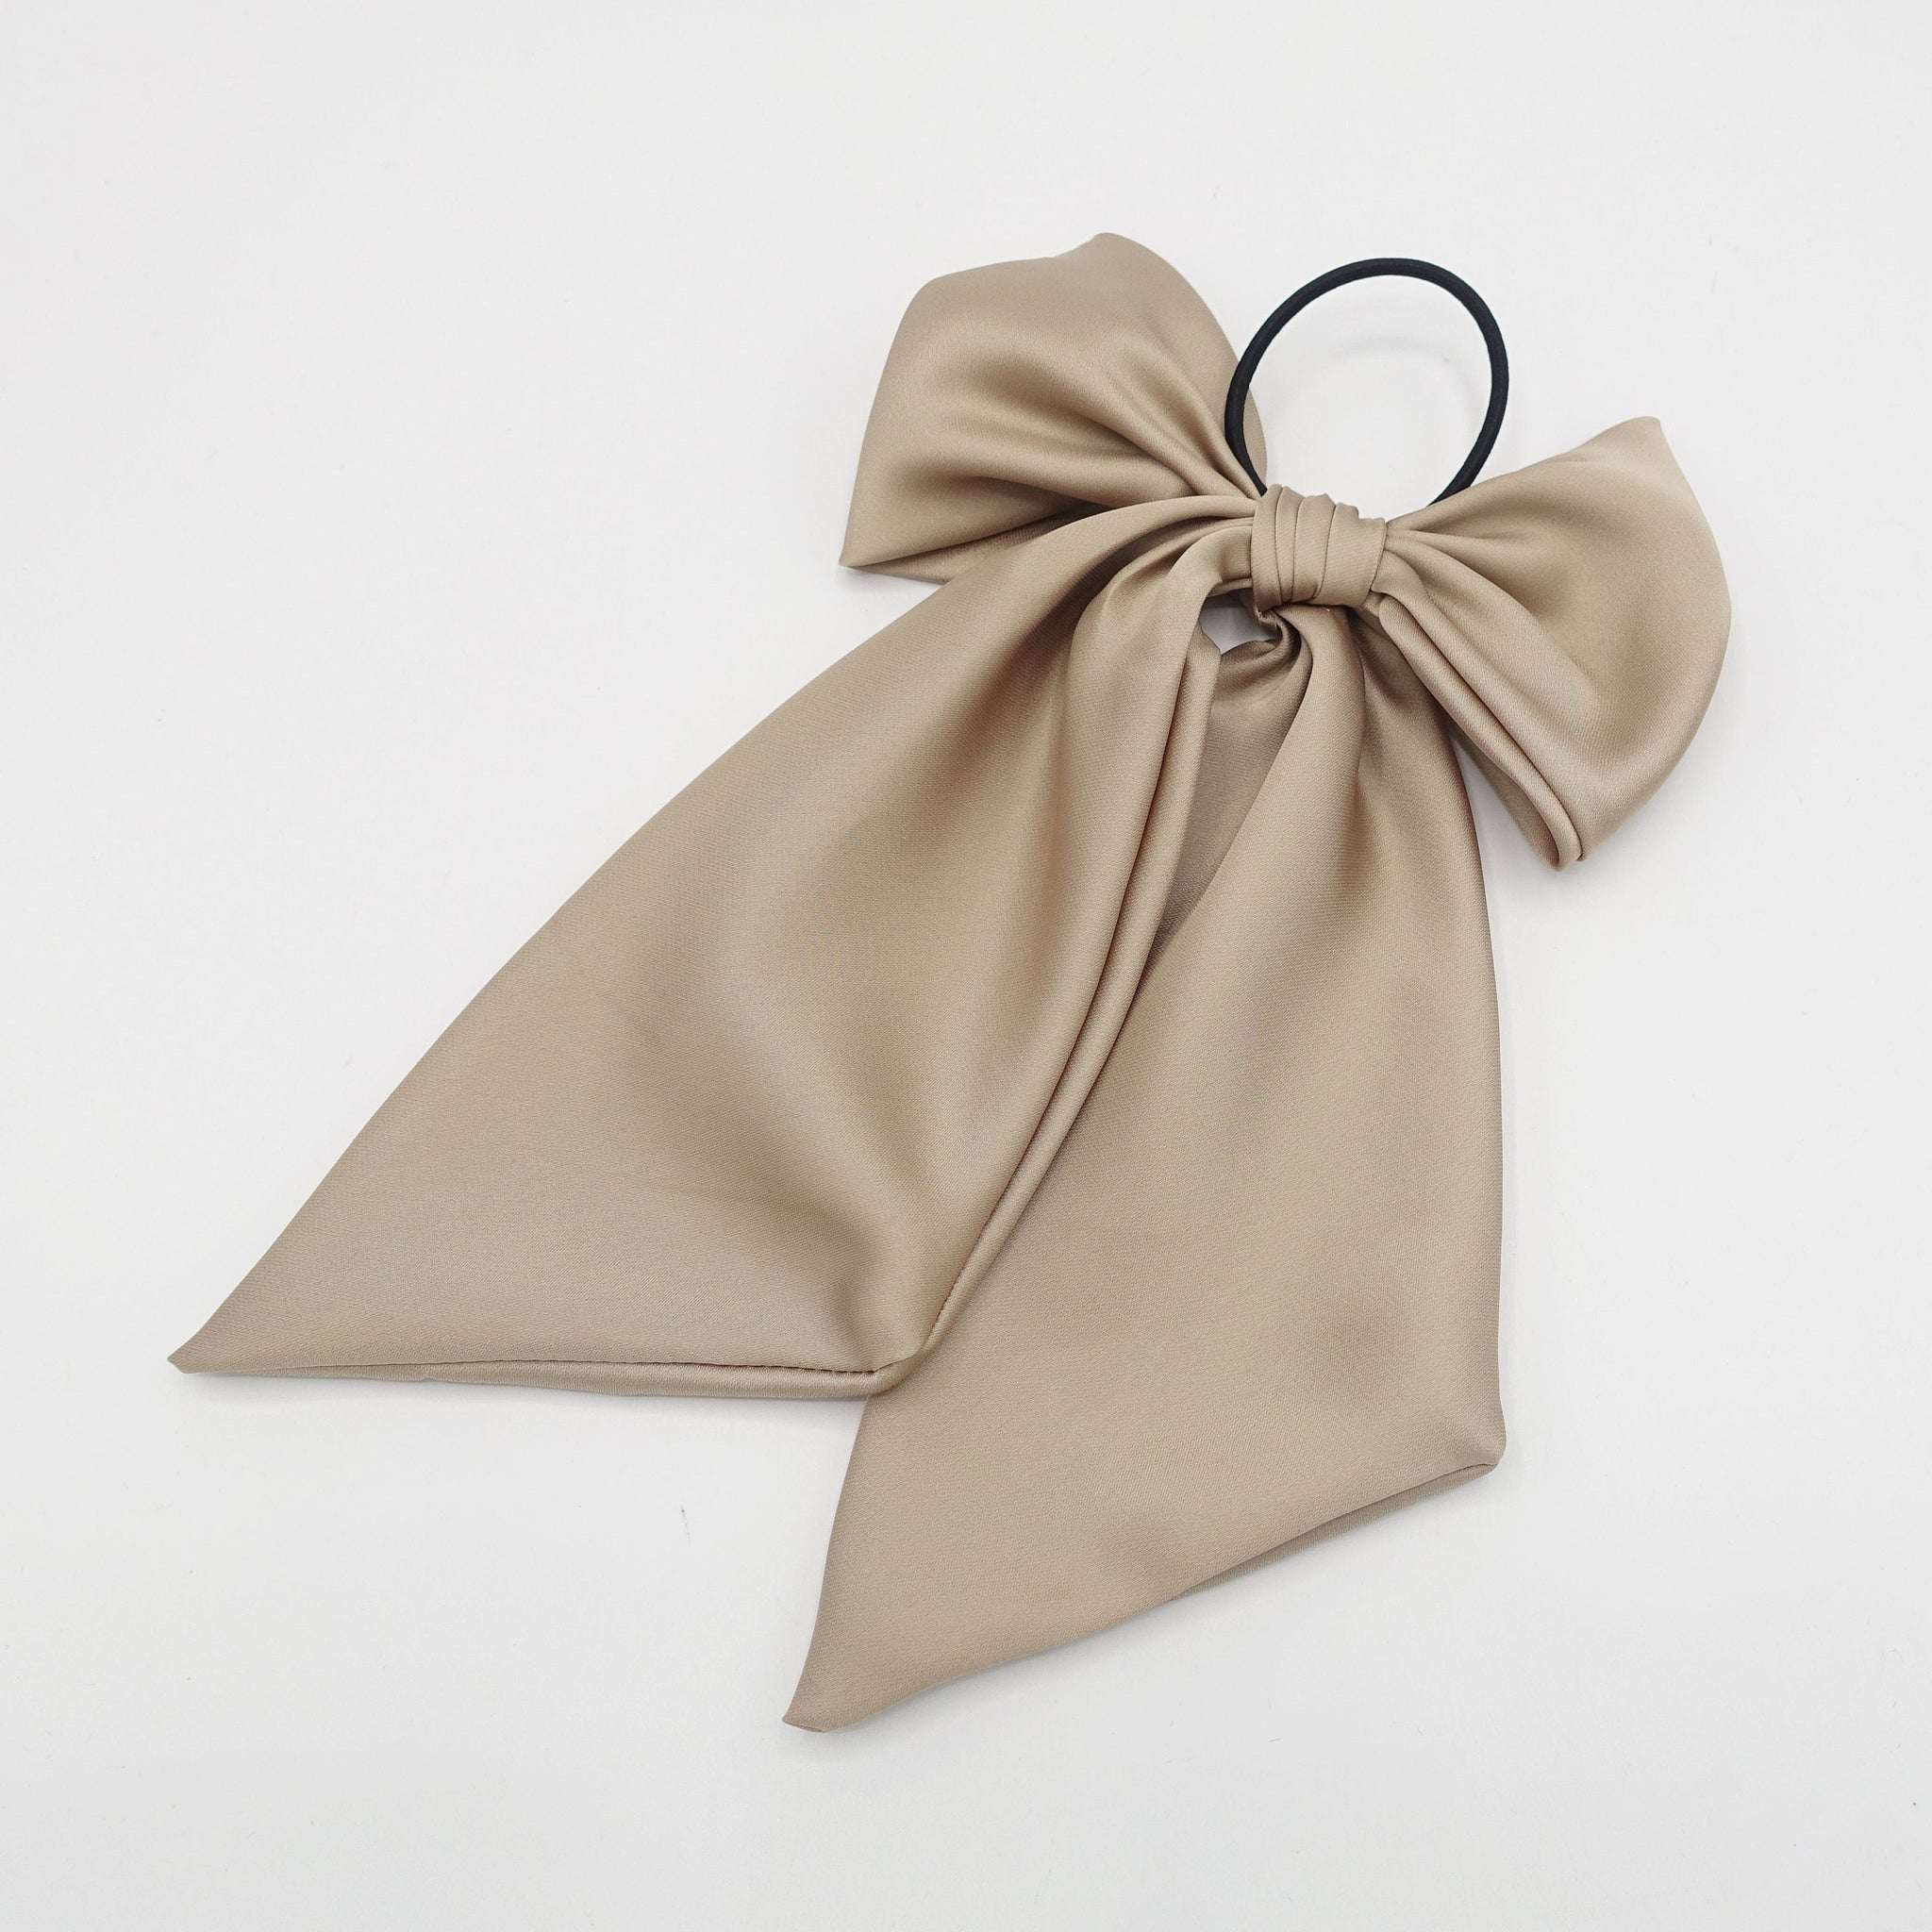 VeryShine Cellulose Acetate Tail Bow Knot Hair Tie Elastic Ponytail Holder Mocca